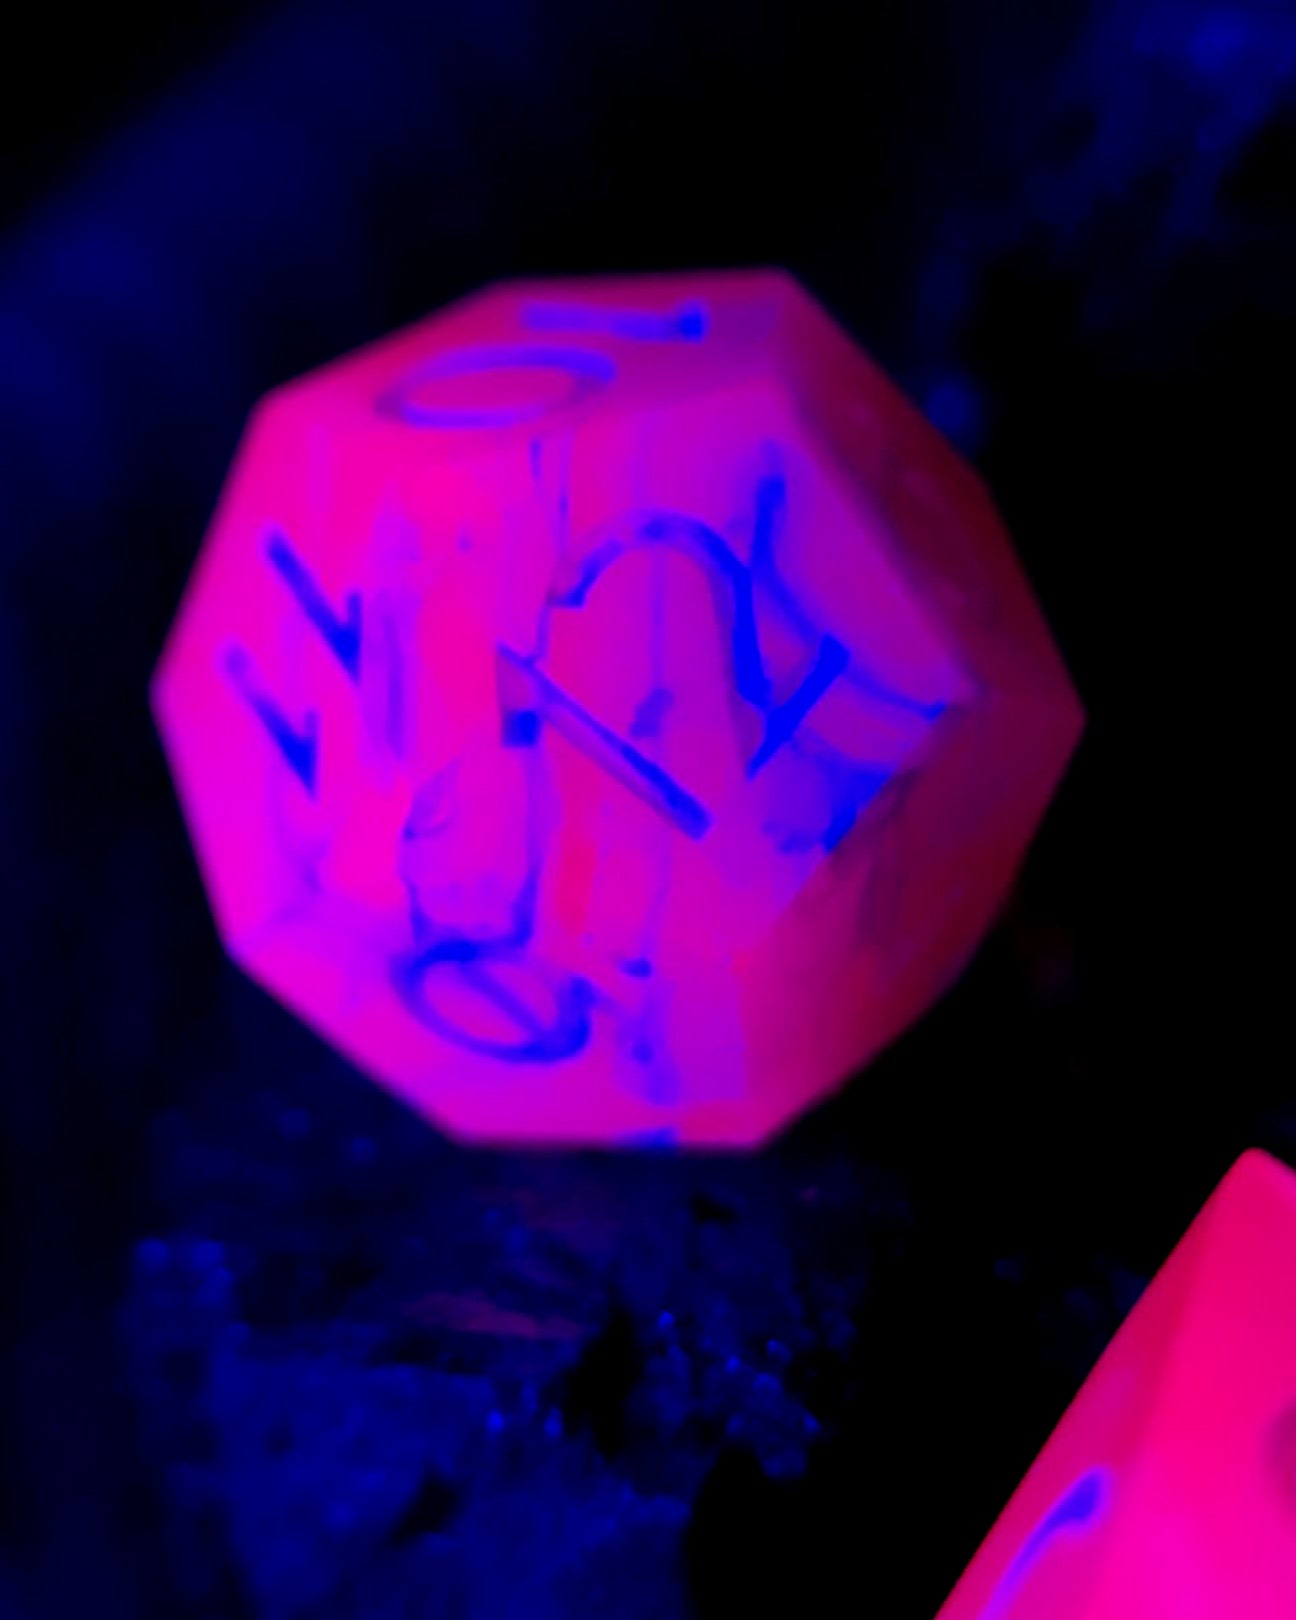 Bardic Dream UV reactive - 7 Piece handmade D&D Dice| Hand Crafted Dungeons and Dragons Dice